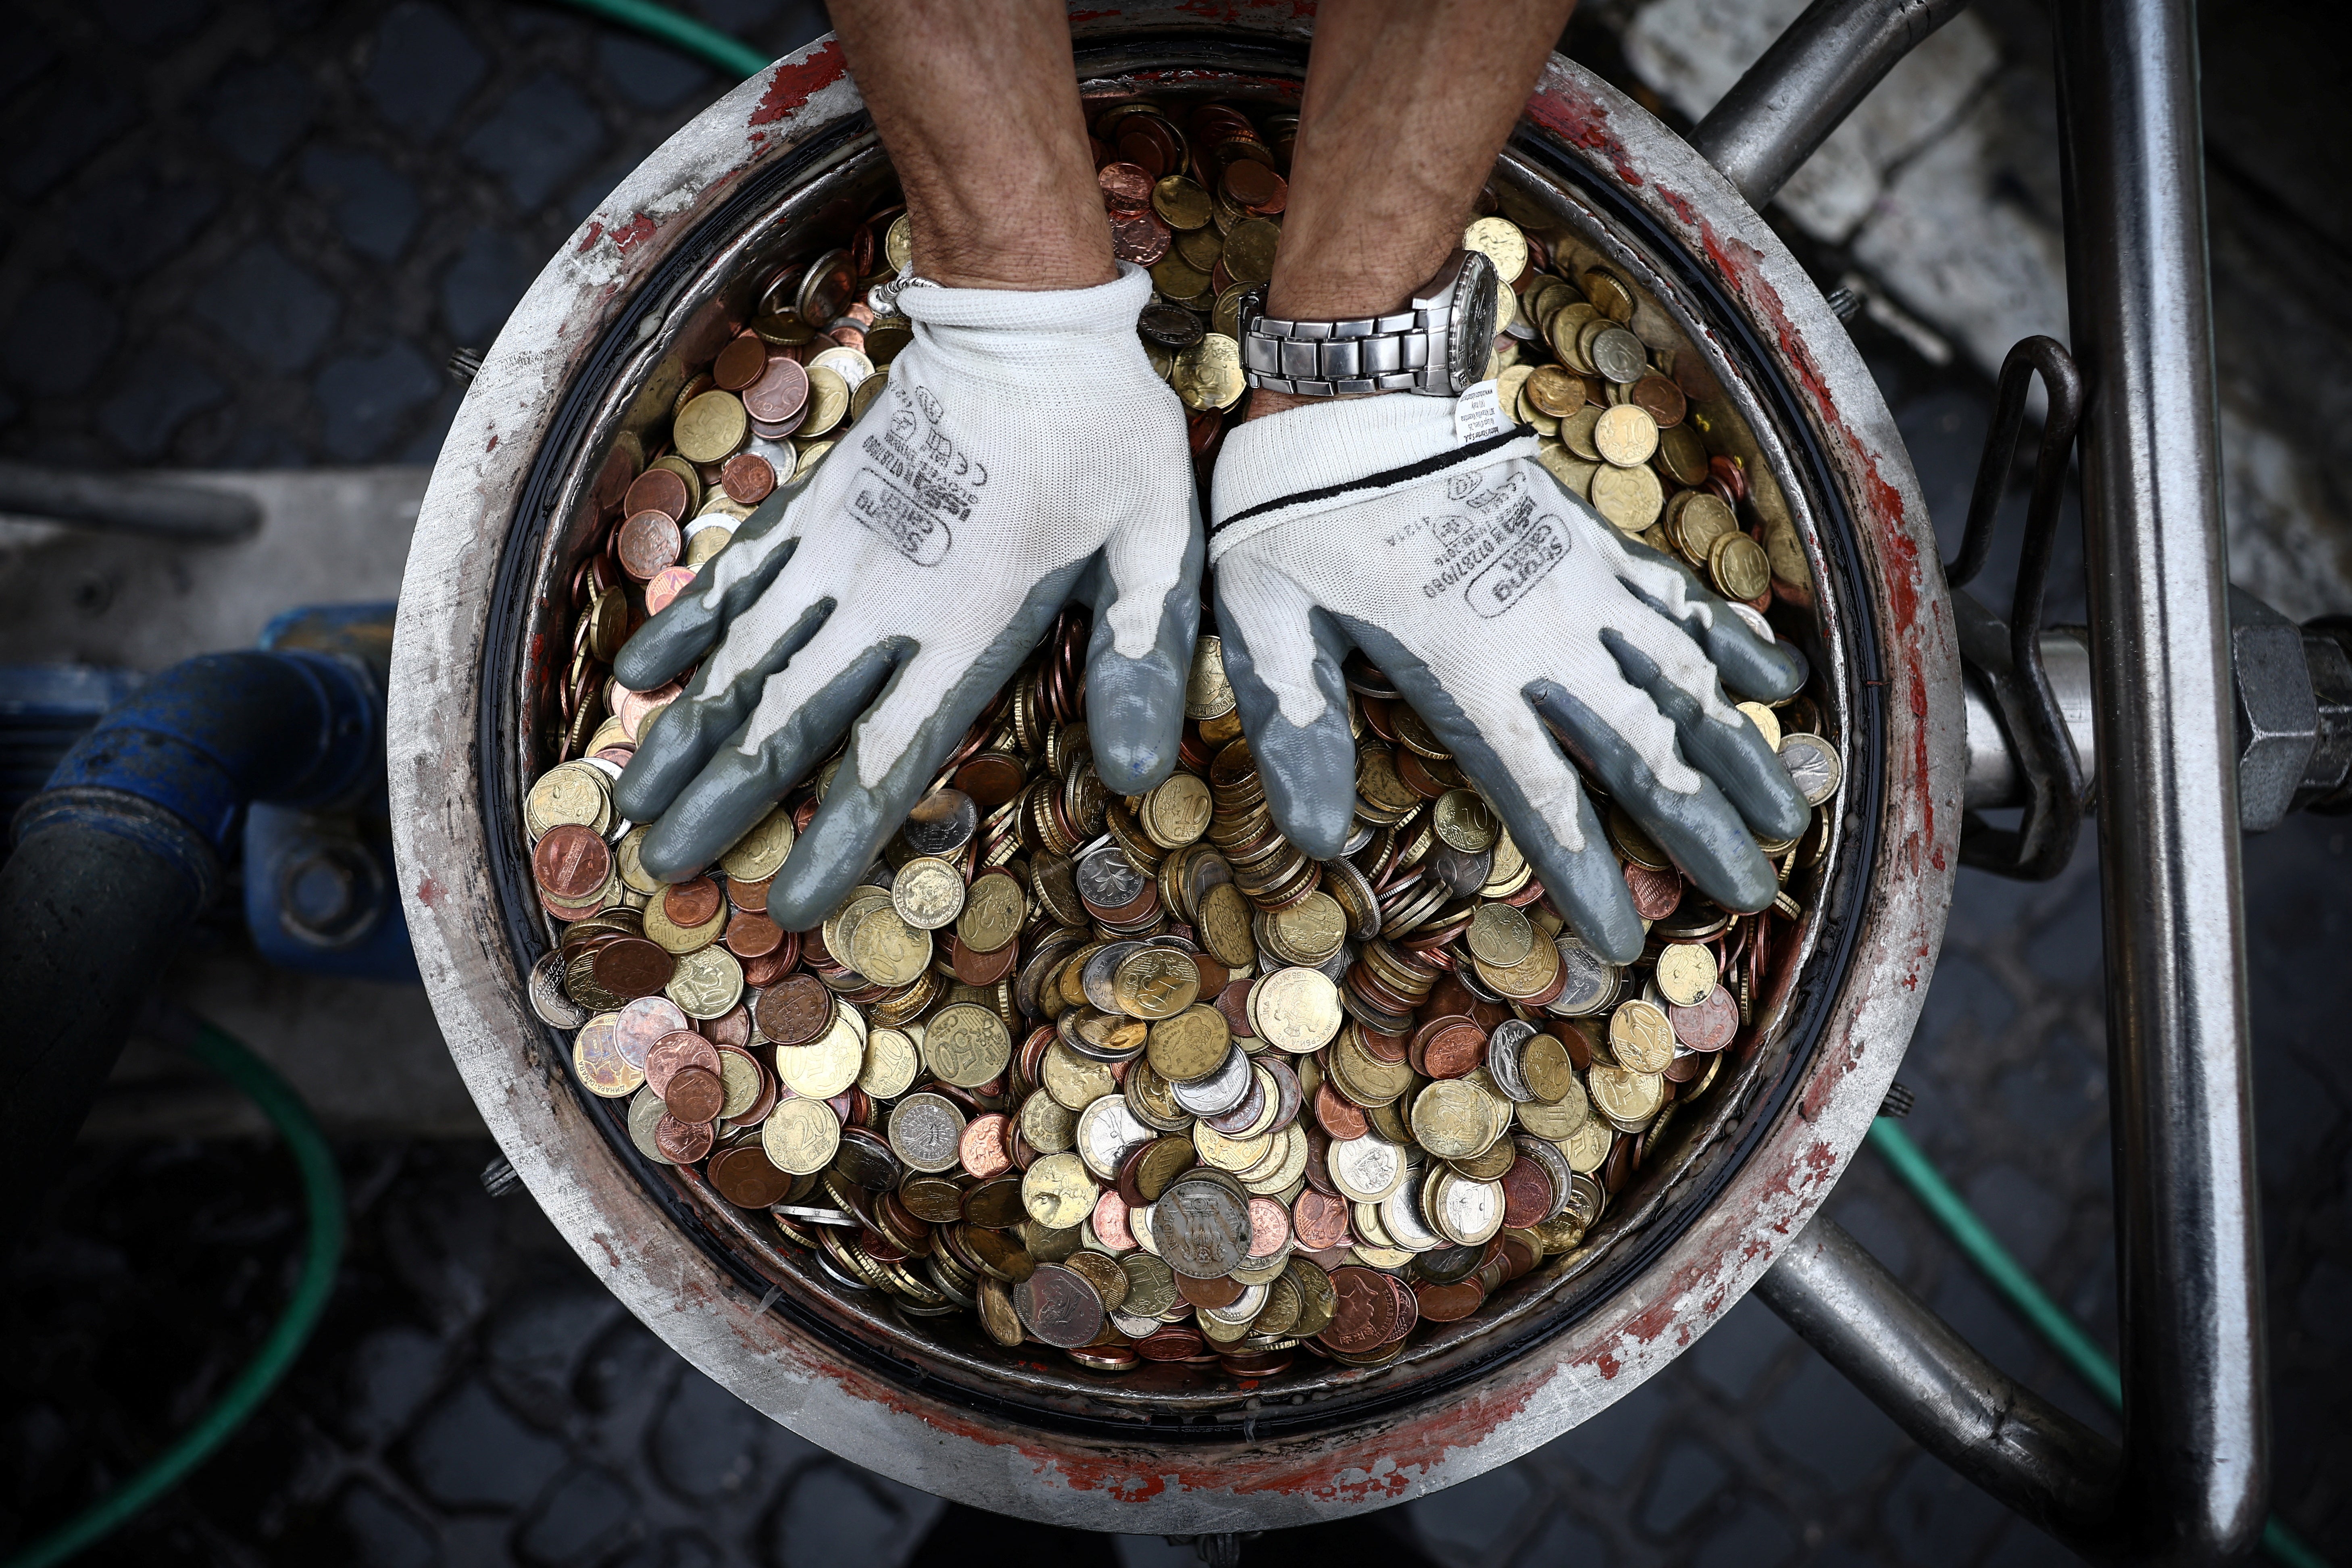 Coins are pictured after having been collected from the Trevi Fountain in Rome